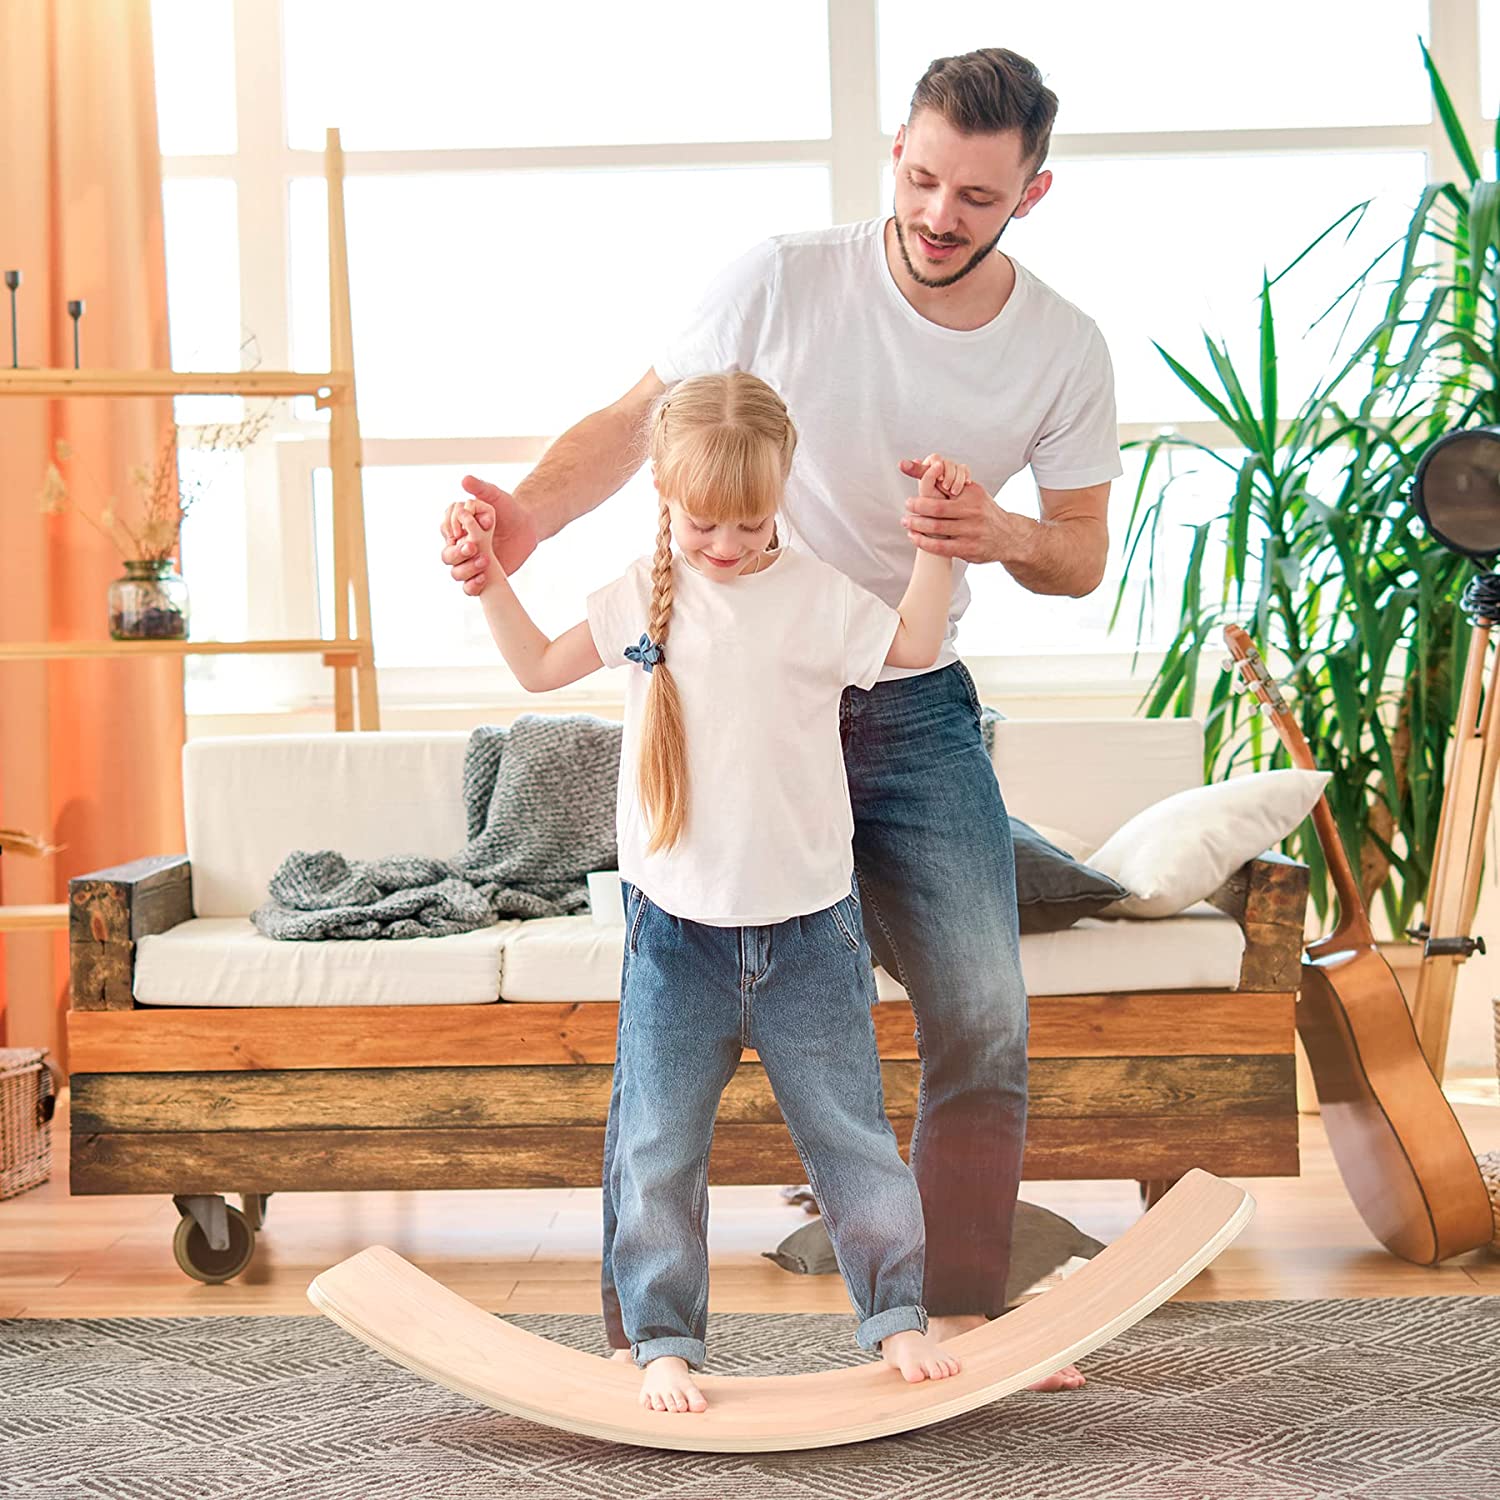 Joyooss Wooden Wobble Balance Board for Kids Toddlers Adults, Rocker Board Open Ended Learning Toy, Yoga Curvy Board for Indoors & Outdoors, 33.6 Inch, Holds Up to 485 LBS